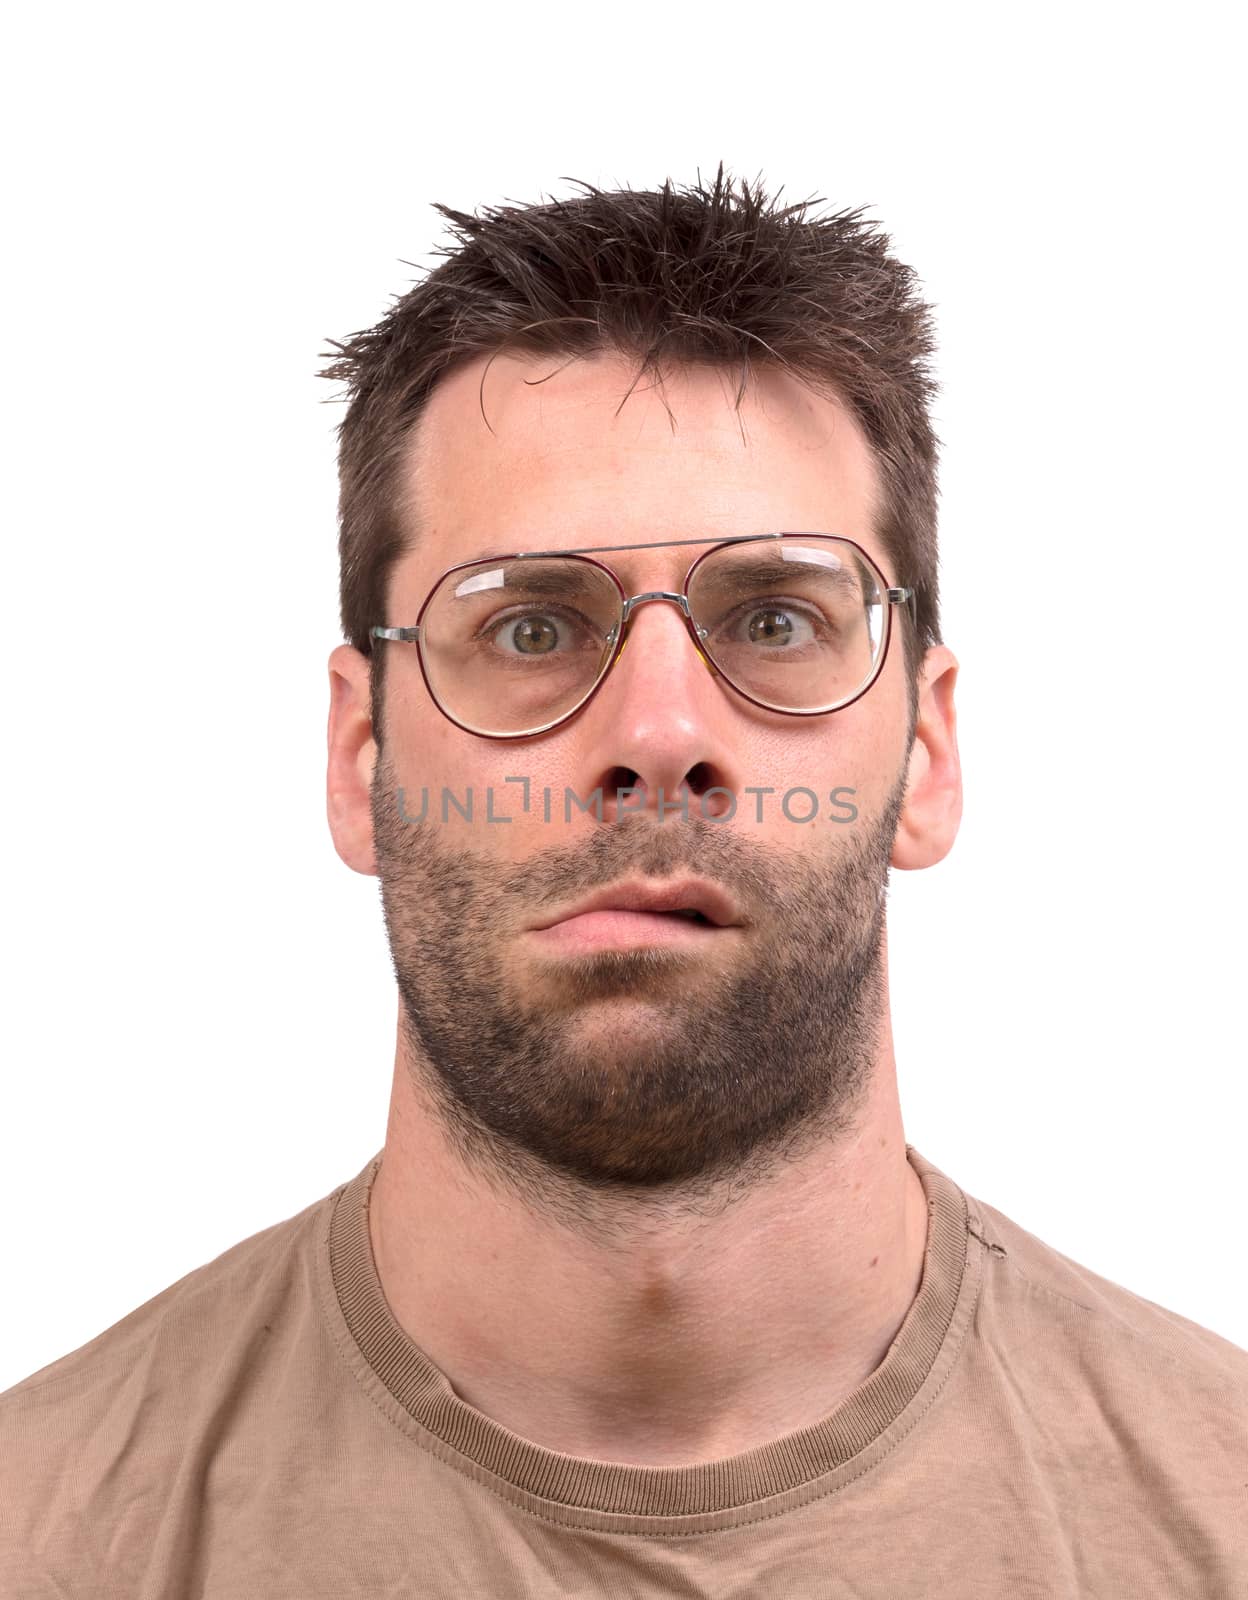 Goofy man with vintage glasses - Isolated on white